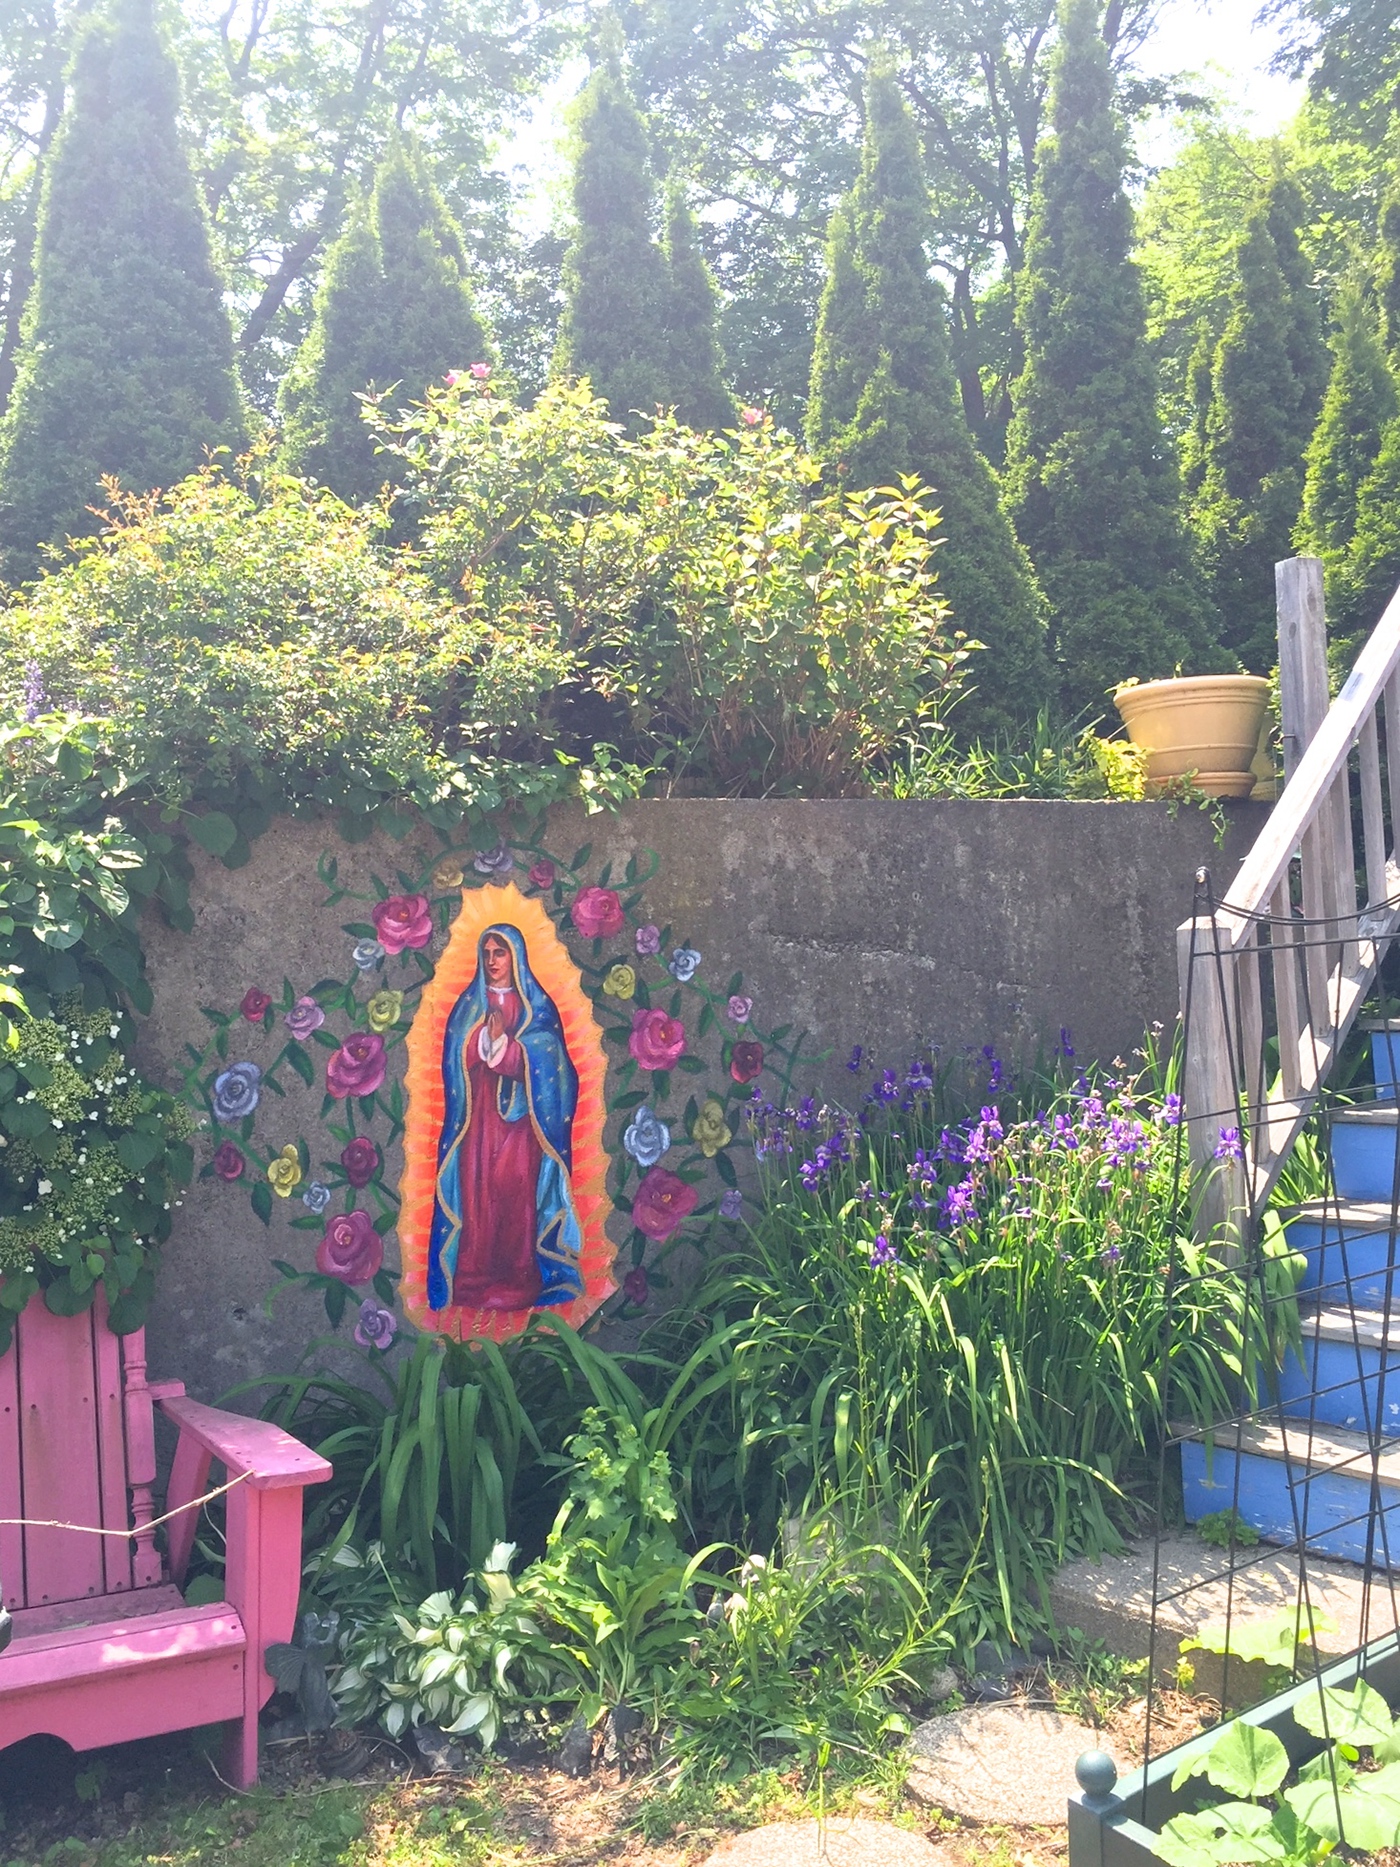 Virgin of Guadalupe our lady Guadalupe Mural wall concrete colorful Flowers virgin Catholic mexico garden outdoors paint Frida Kahlo